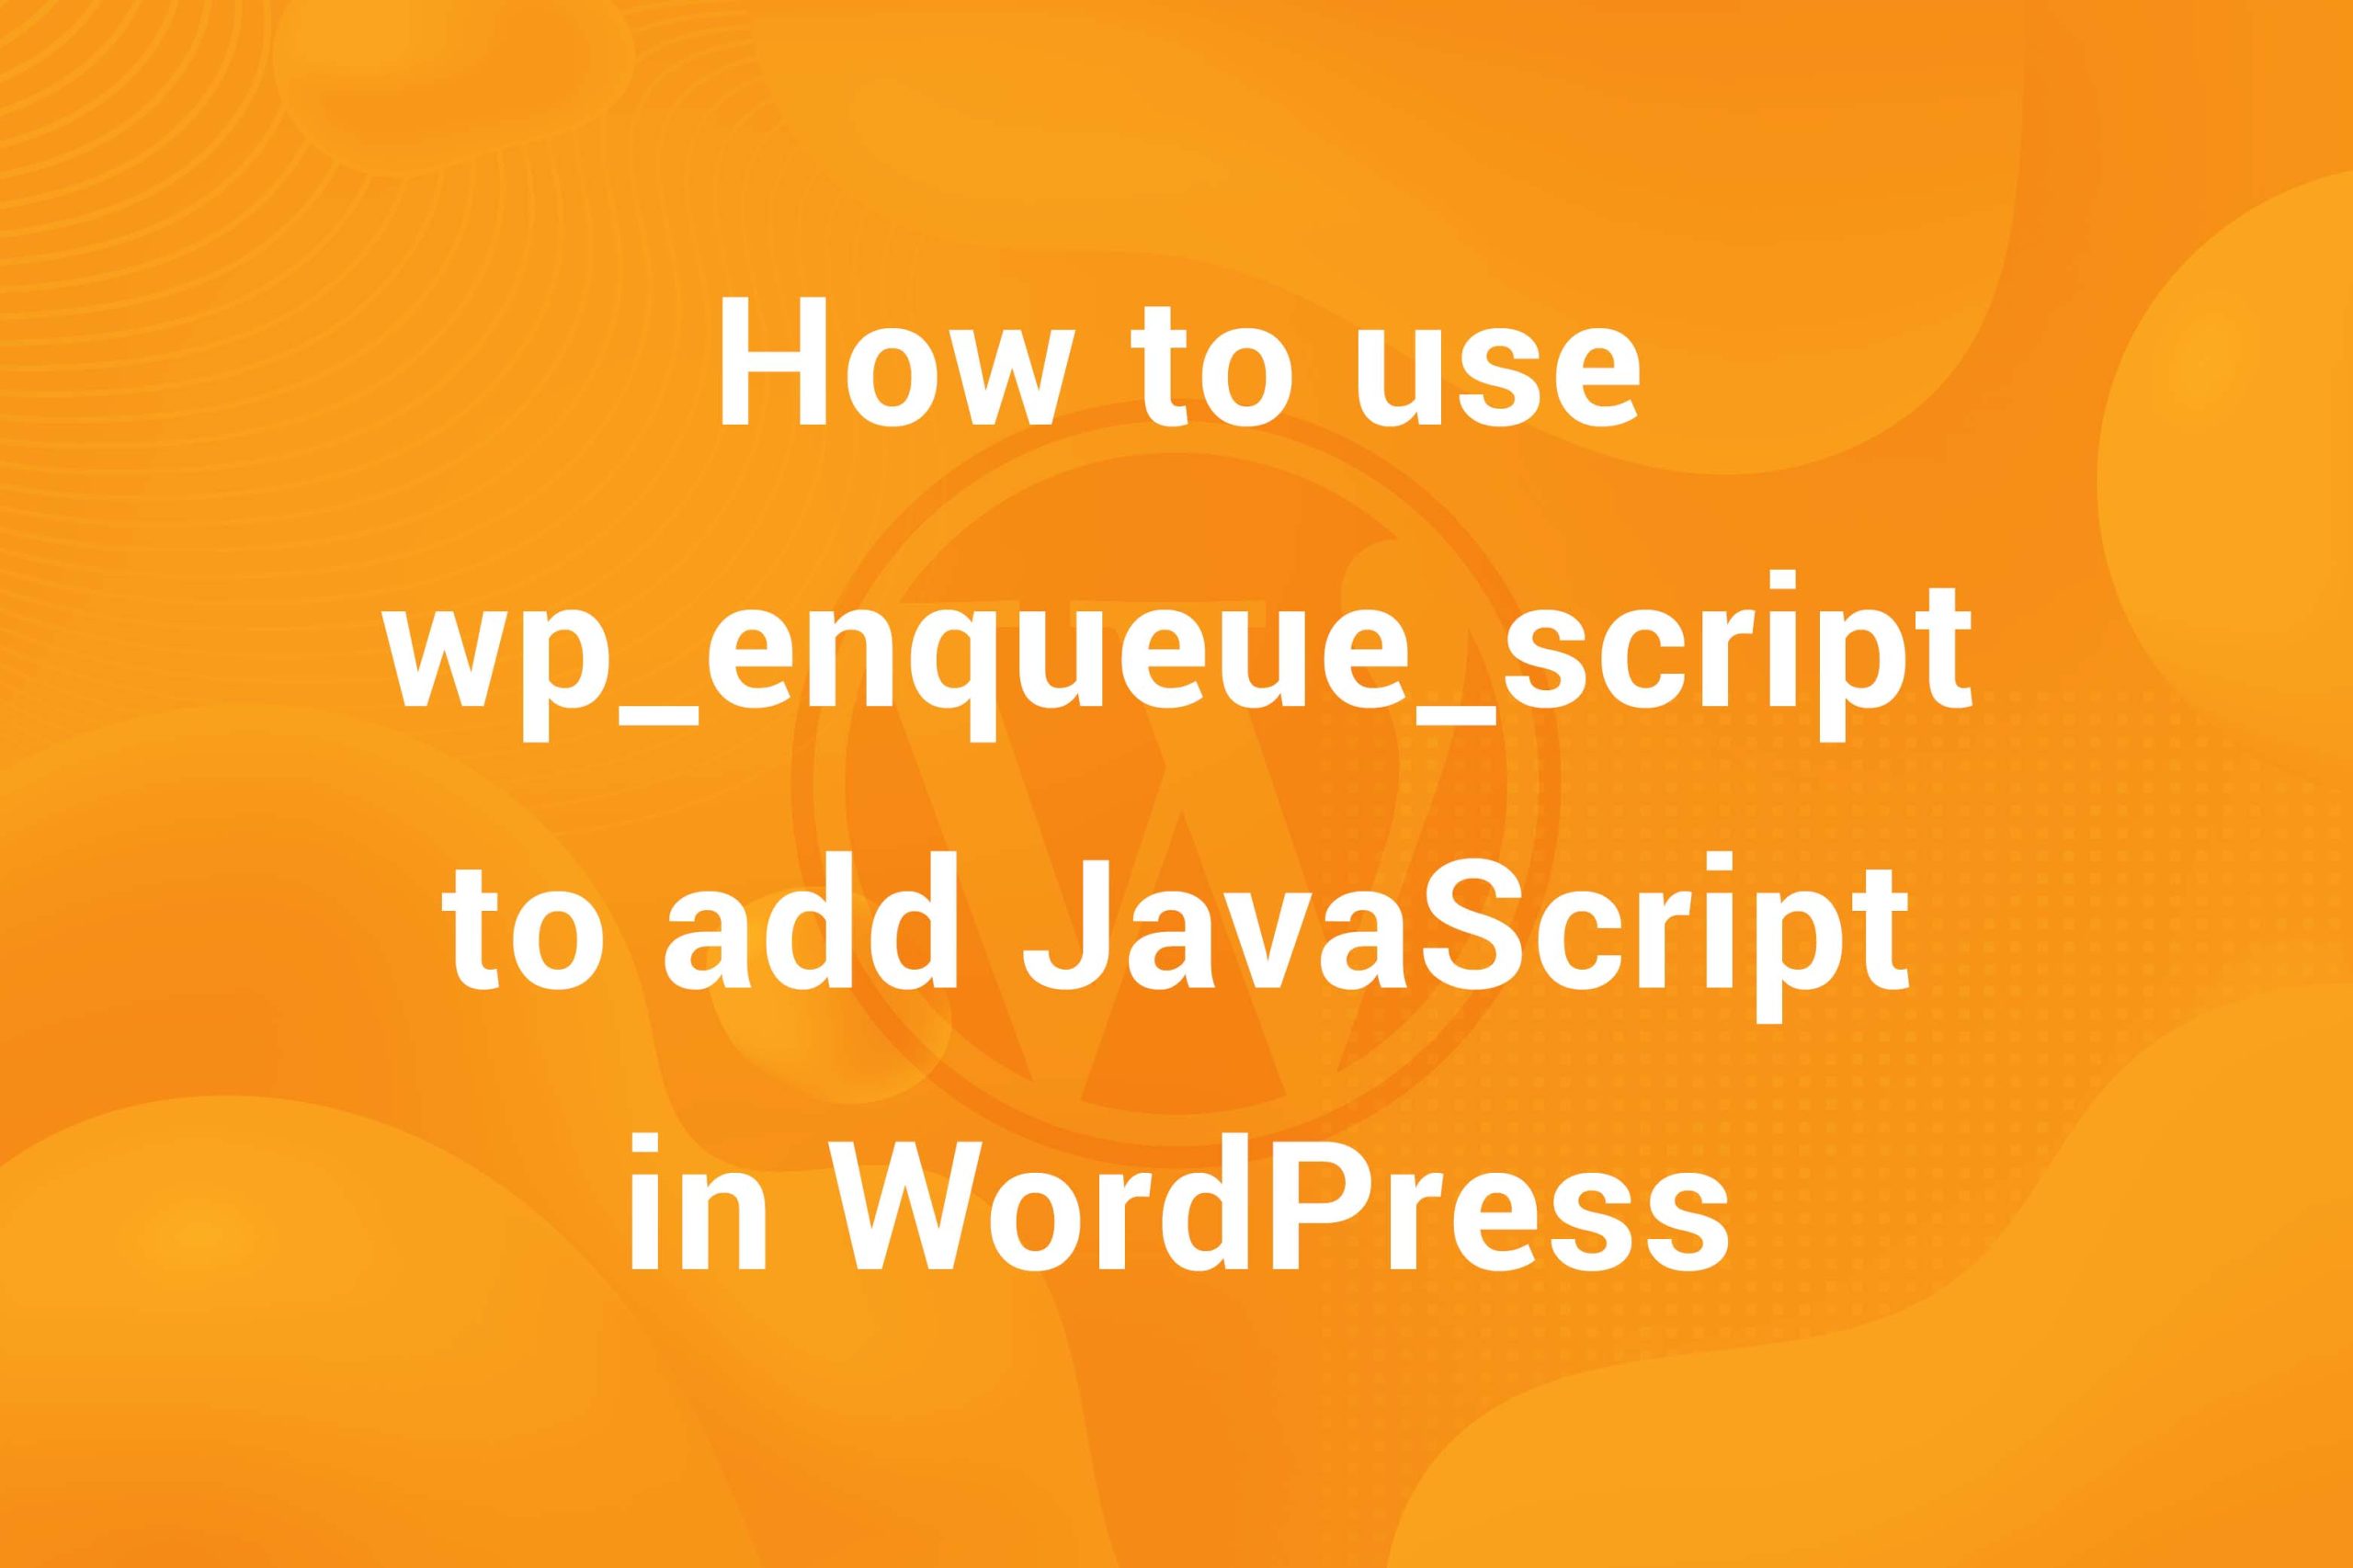 How to Use wp_enqueue_script to Load JavaScript in WordPress